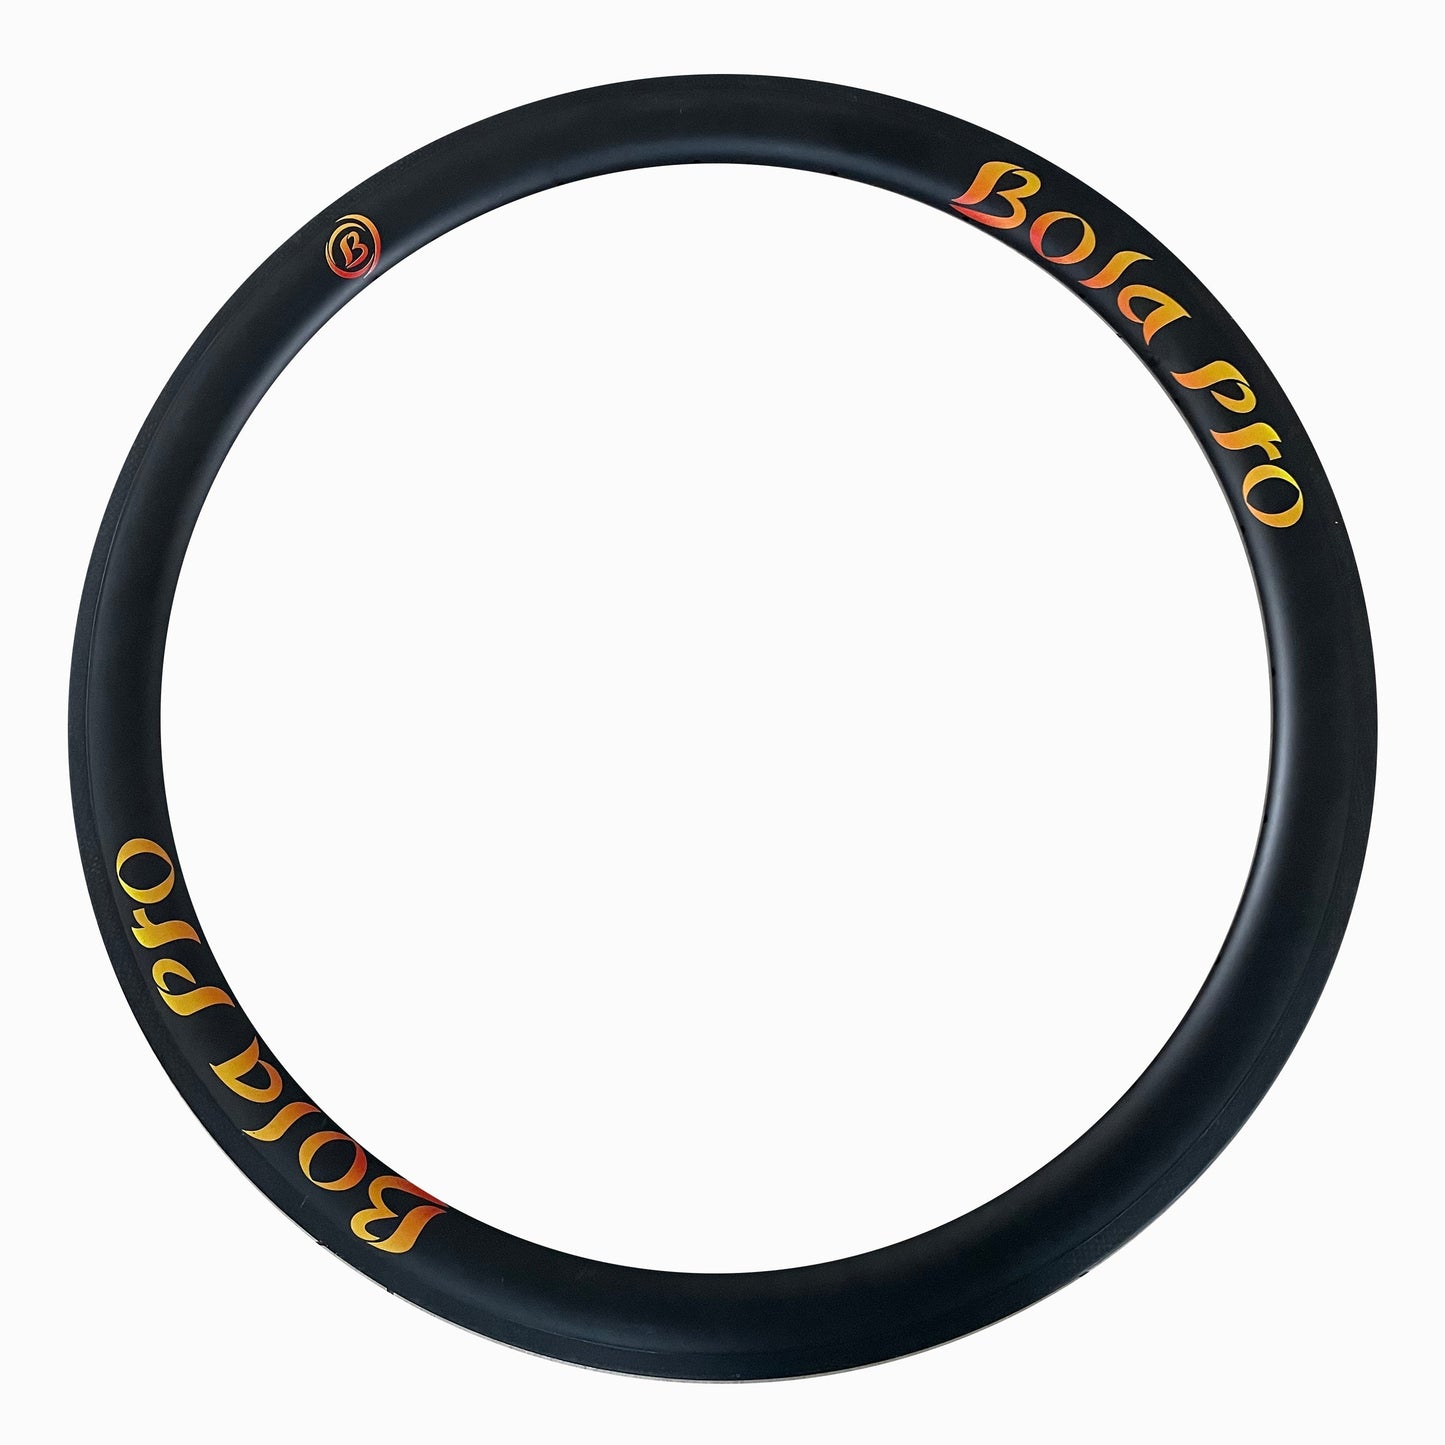 29er MTB carbon asymmetric bicycle rim 30mm profile 27mm inner wide for cross-country or all mountain,Superlight optional Bola